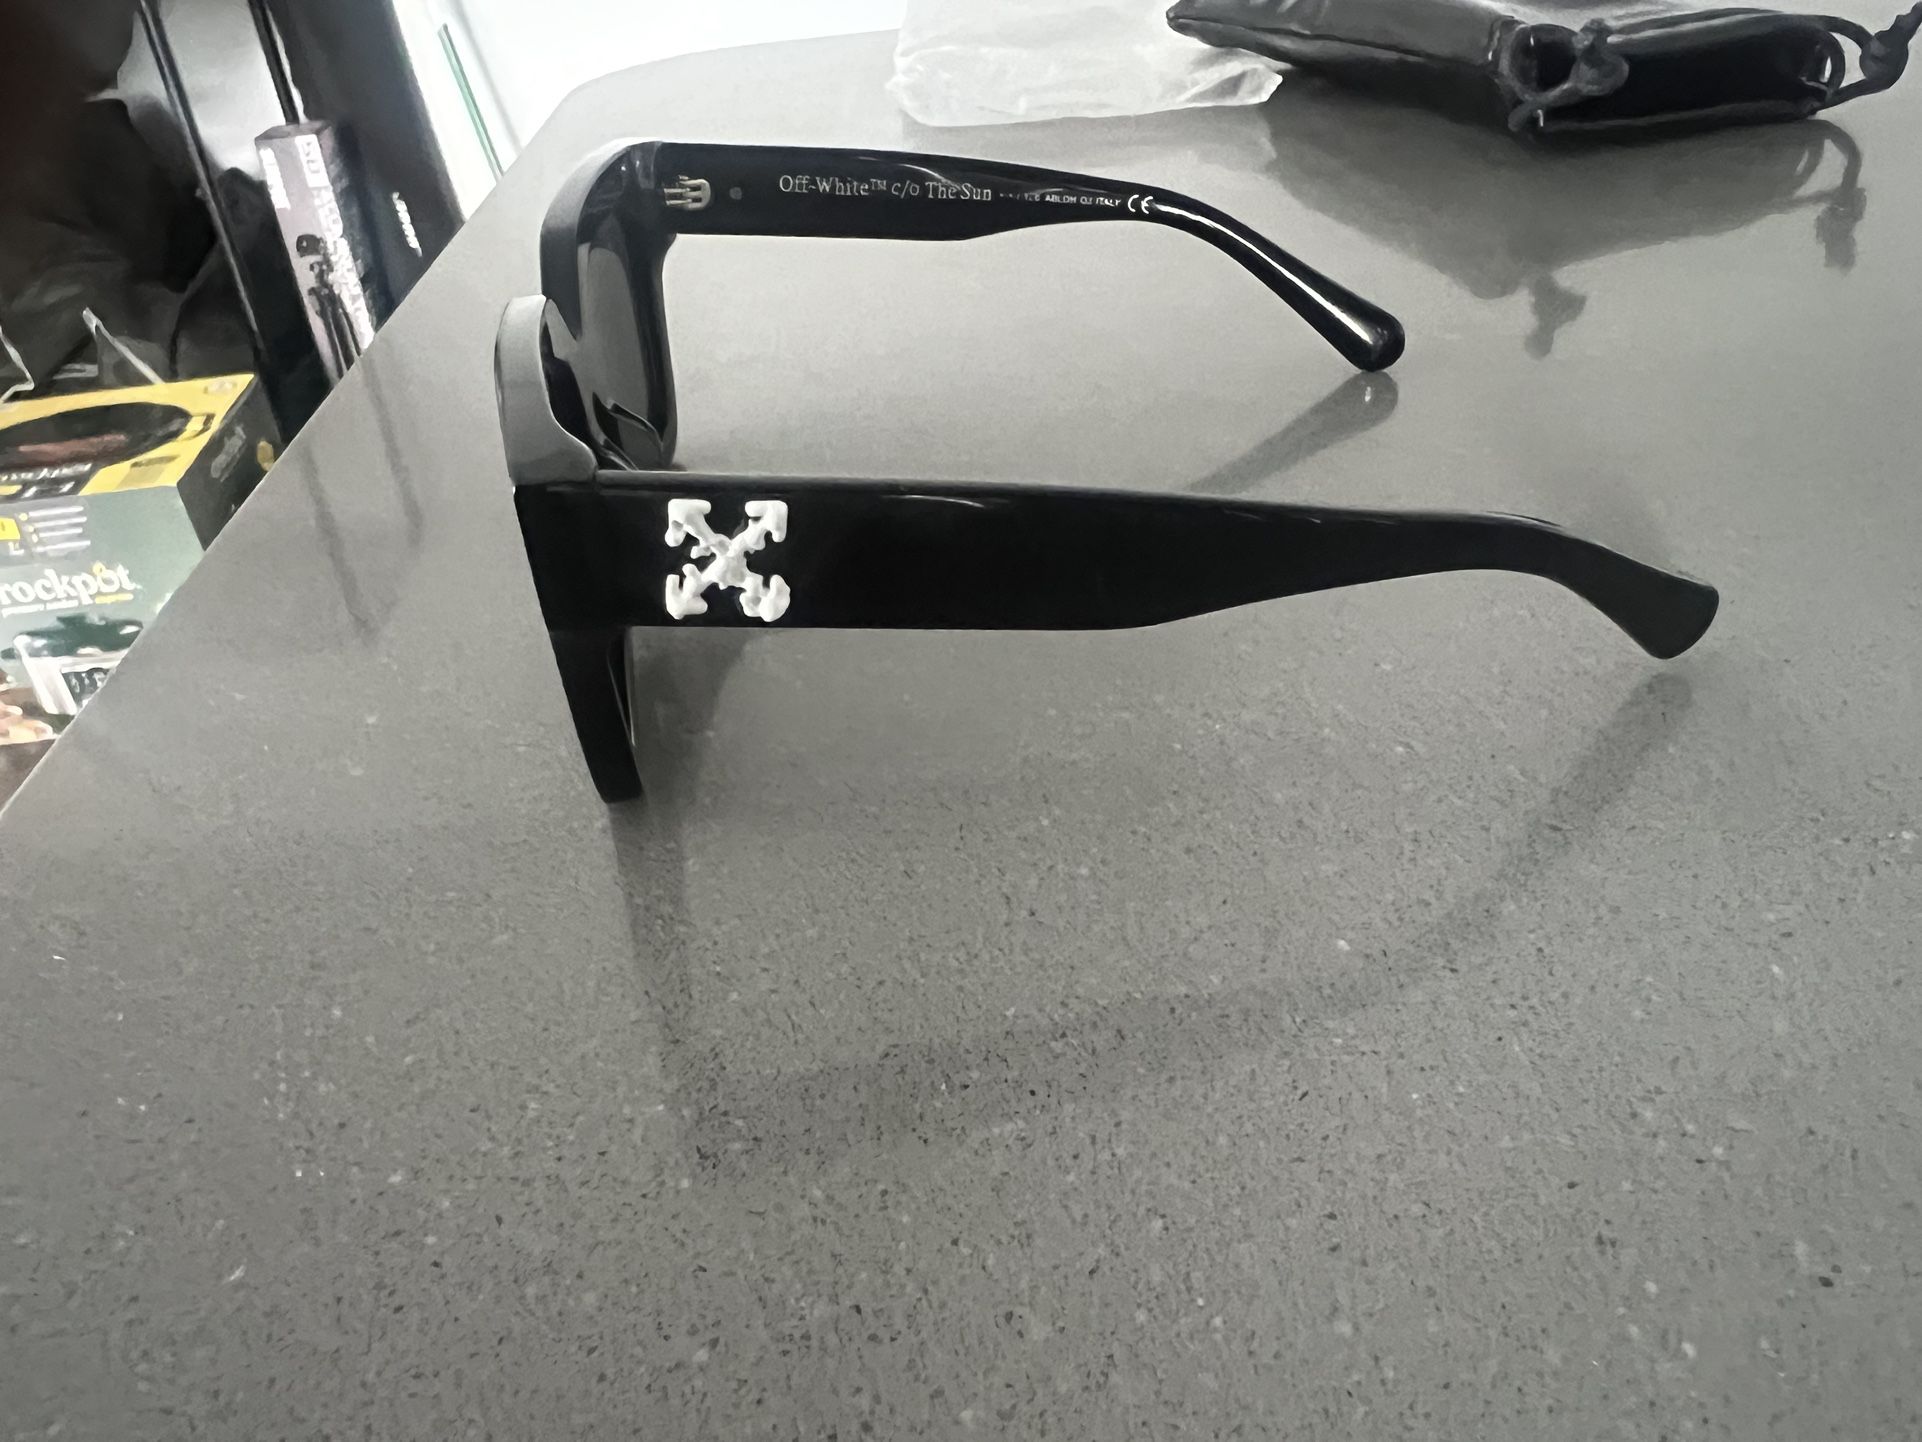 Off White CATALINA Sunglasses for Sale in New York, NY - OfferUp